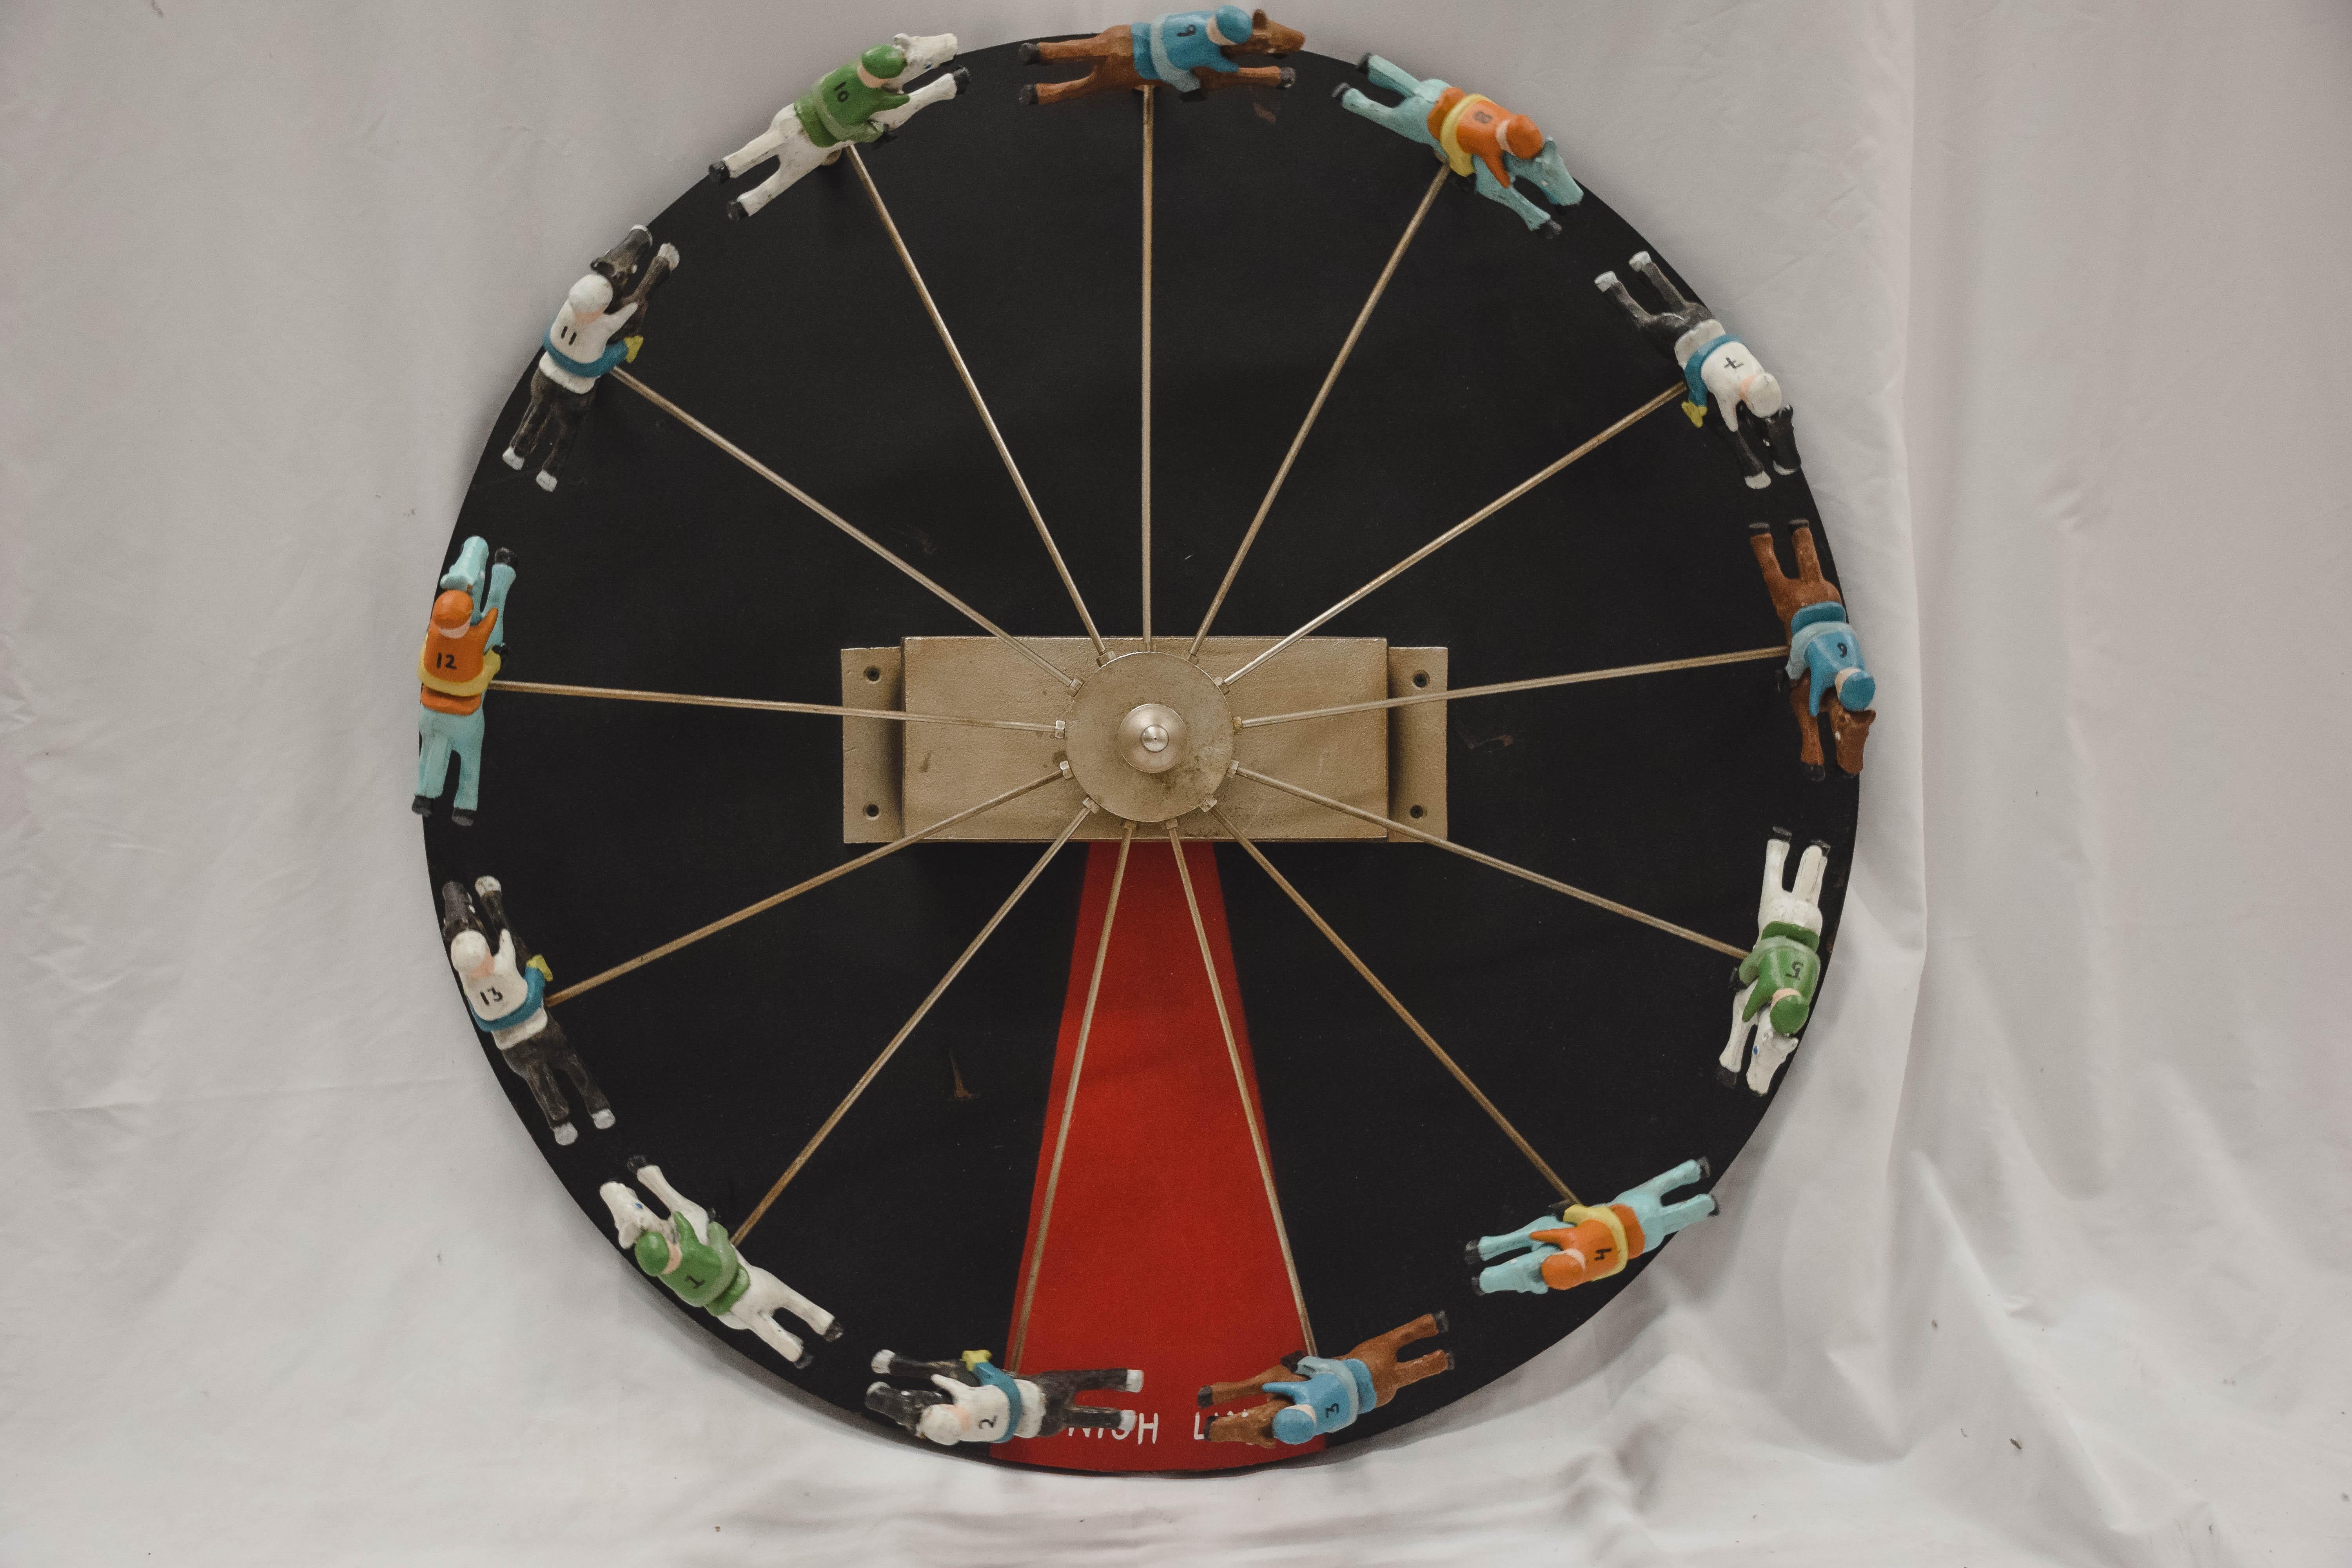 We love this horse and jockey spinning race game wheel and know you will too. The piece features thirteen colorfully painted cast metal horse and jockey combinations on the spokes of a metal wheel. They race above a round black, red and white